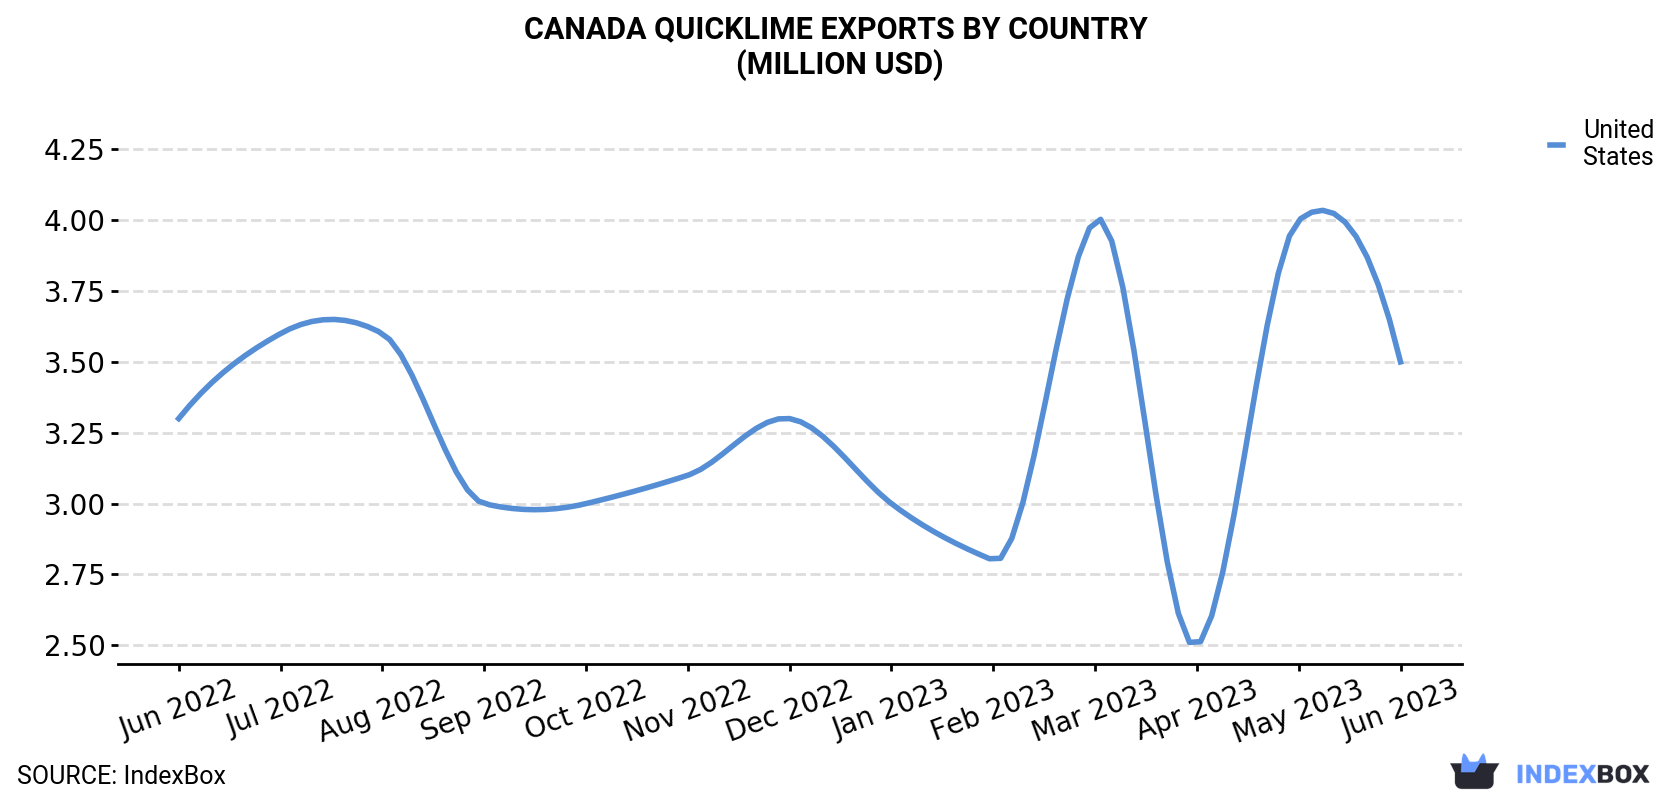 Canada Quicklime Exports By Country (Million USD)